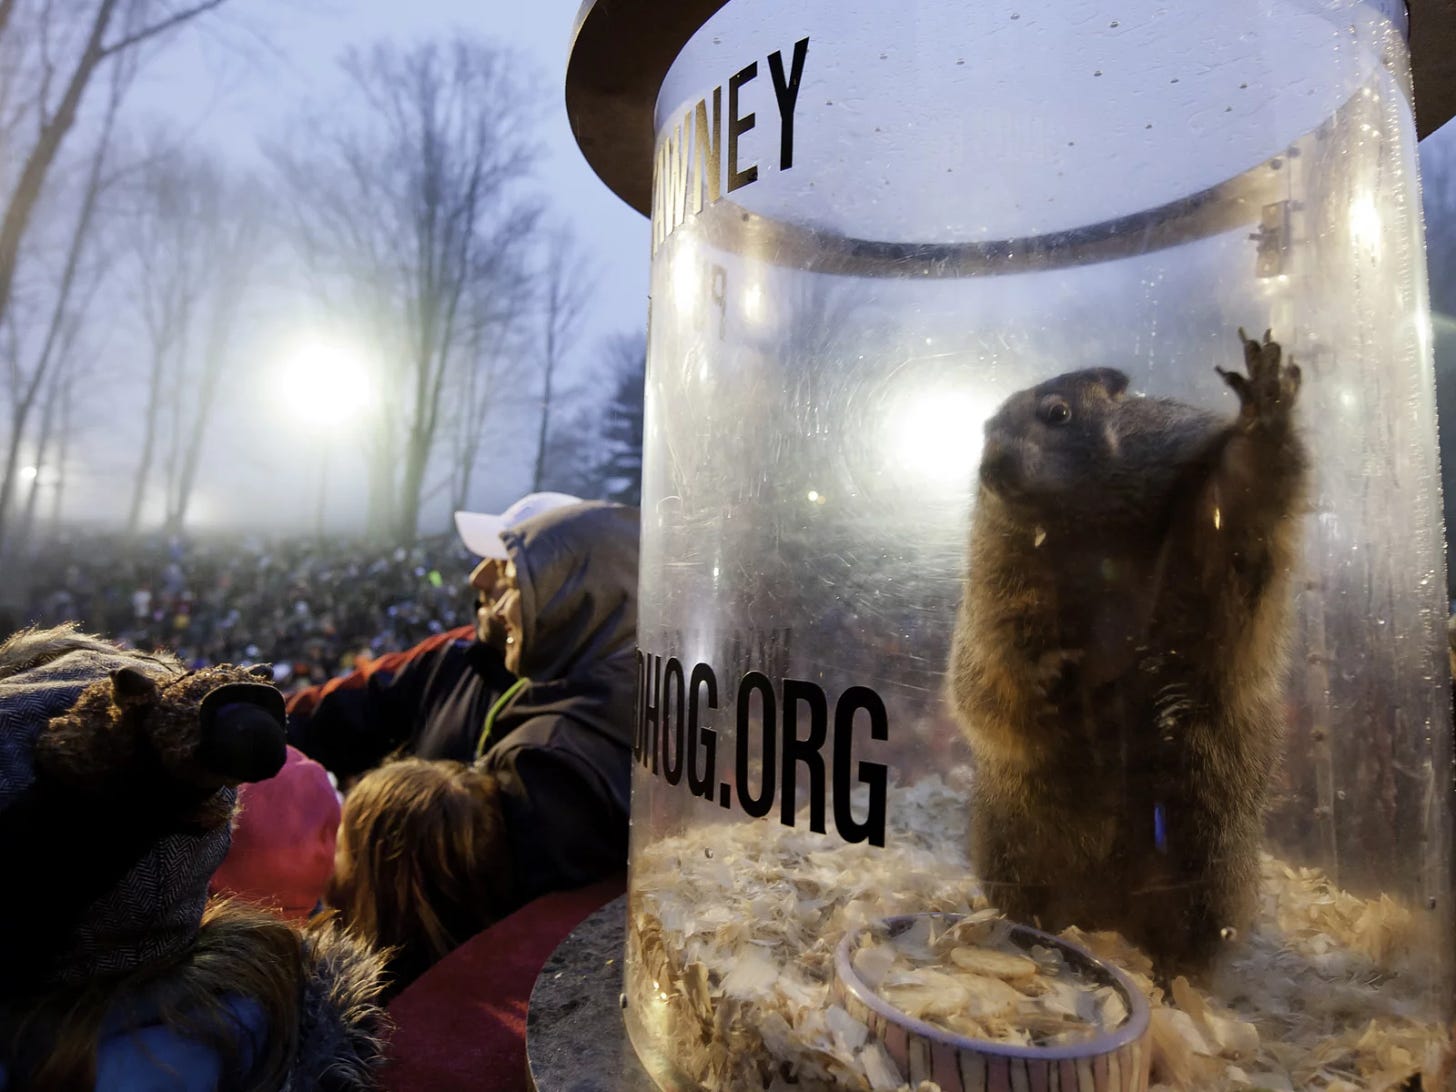 A groundhog in a clear cylinder in front of a crowd.